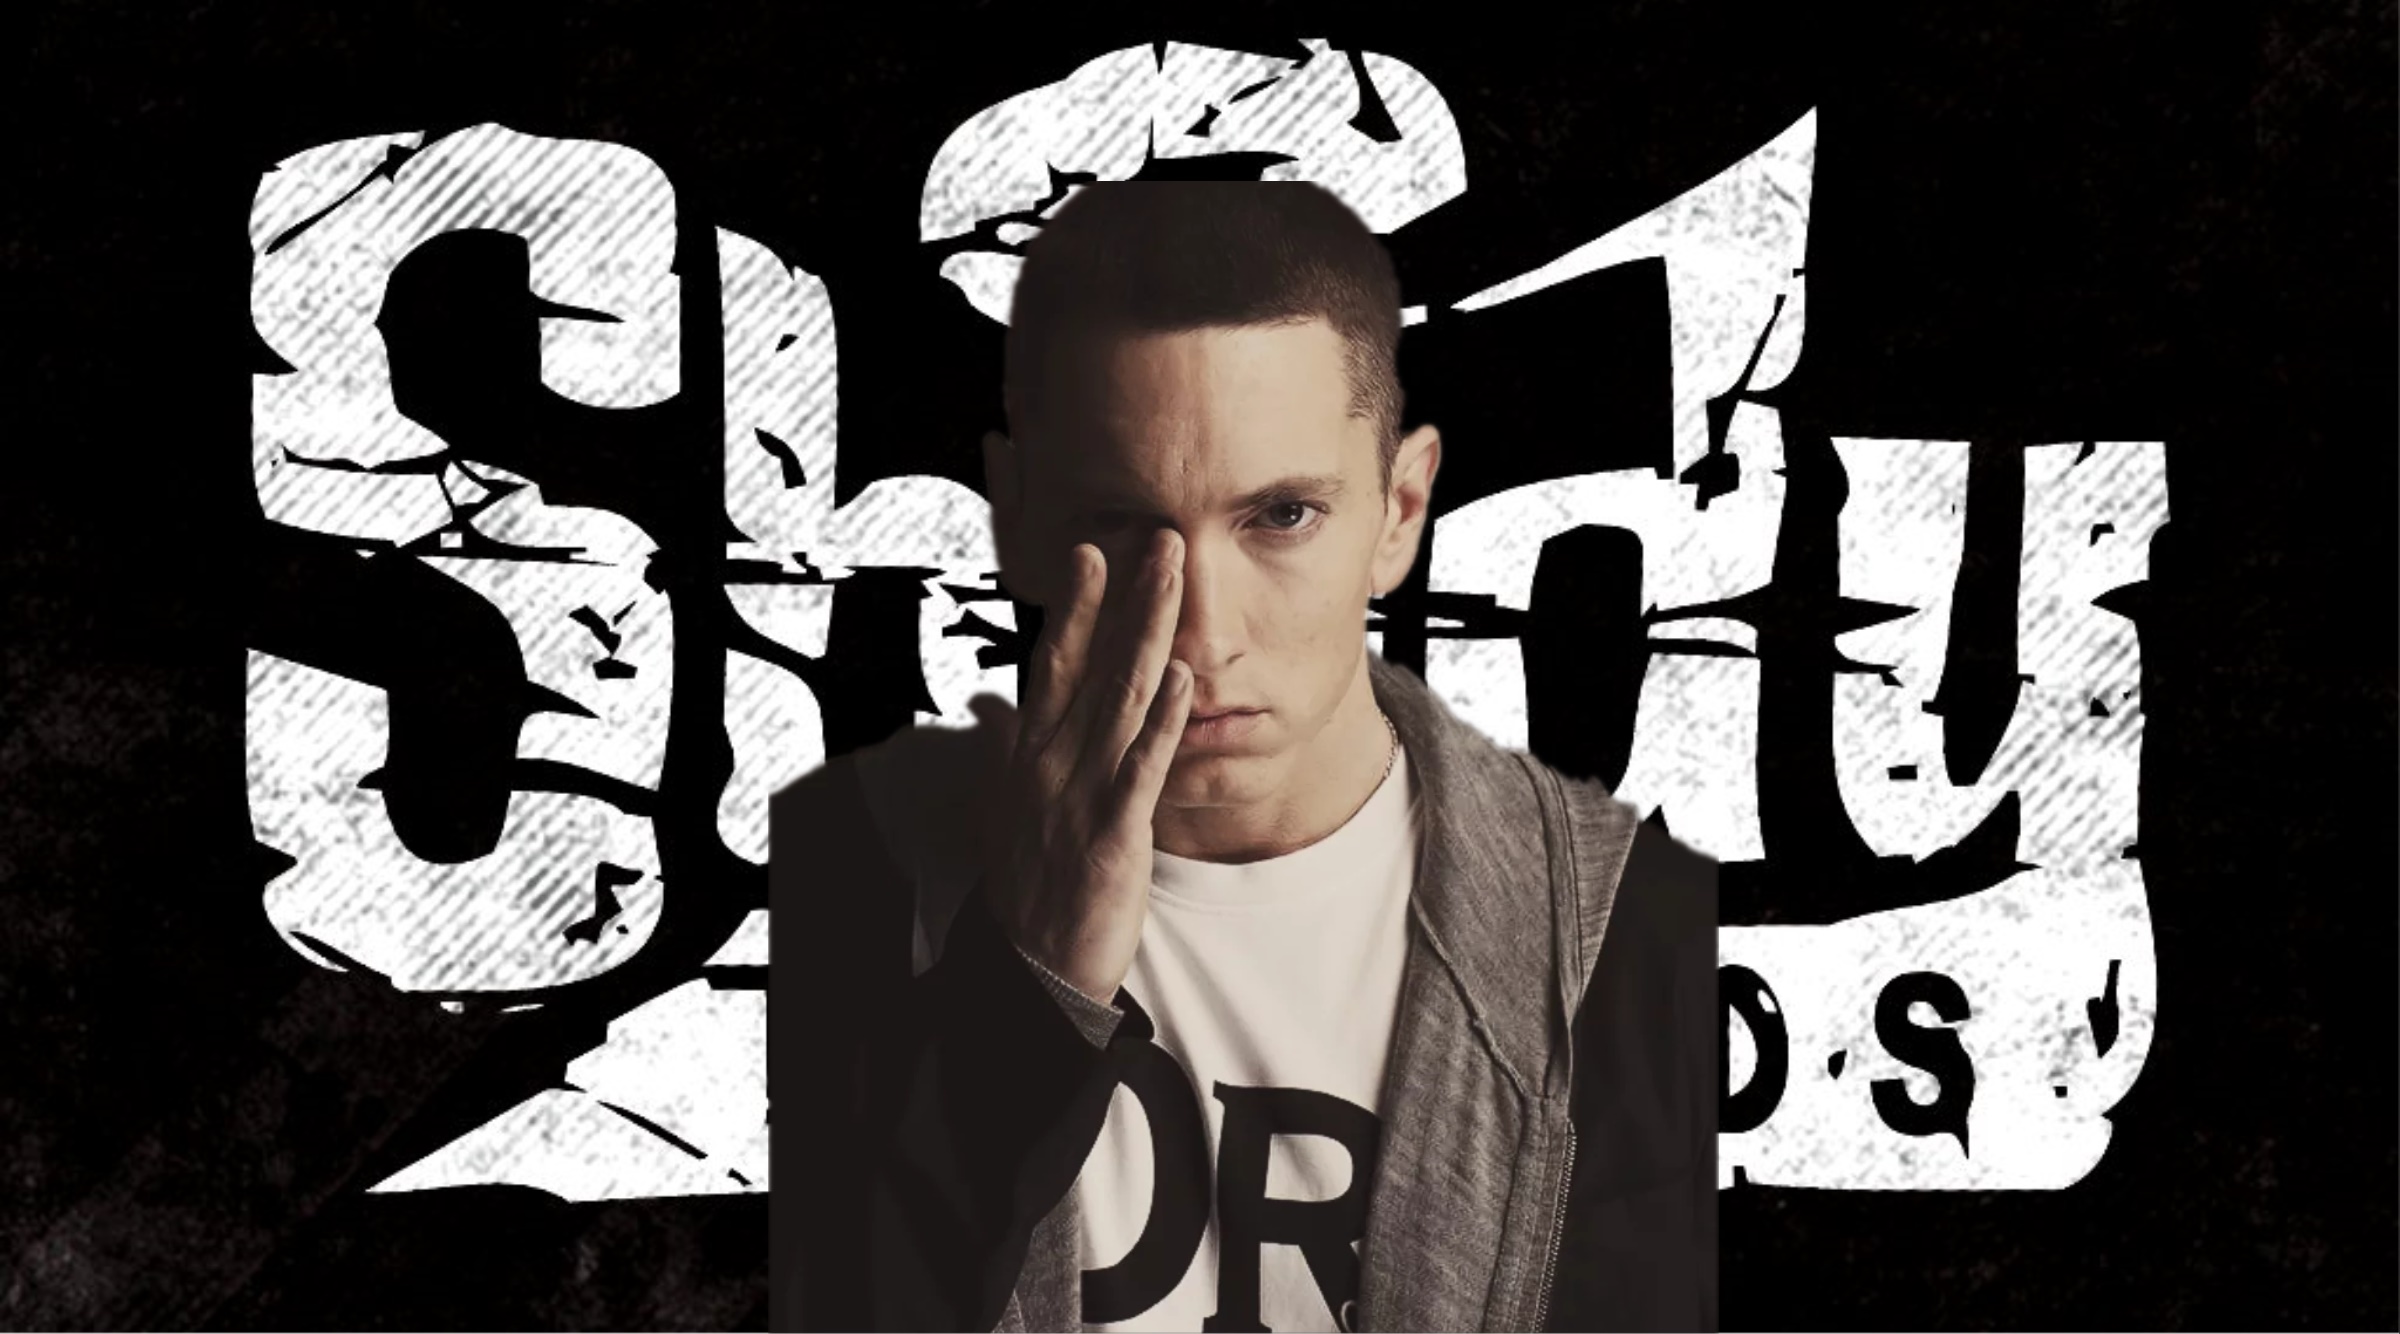 The Slim Shady LP” Remains Eminem's Last Album on Spotify With